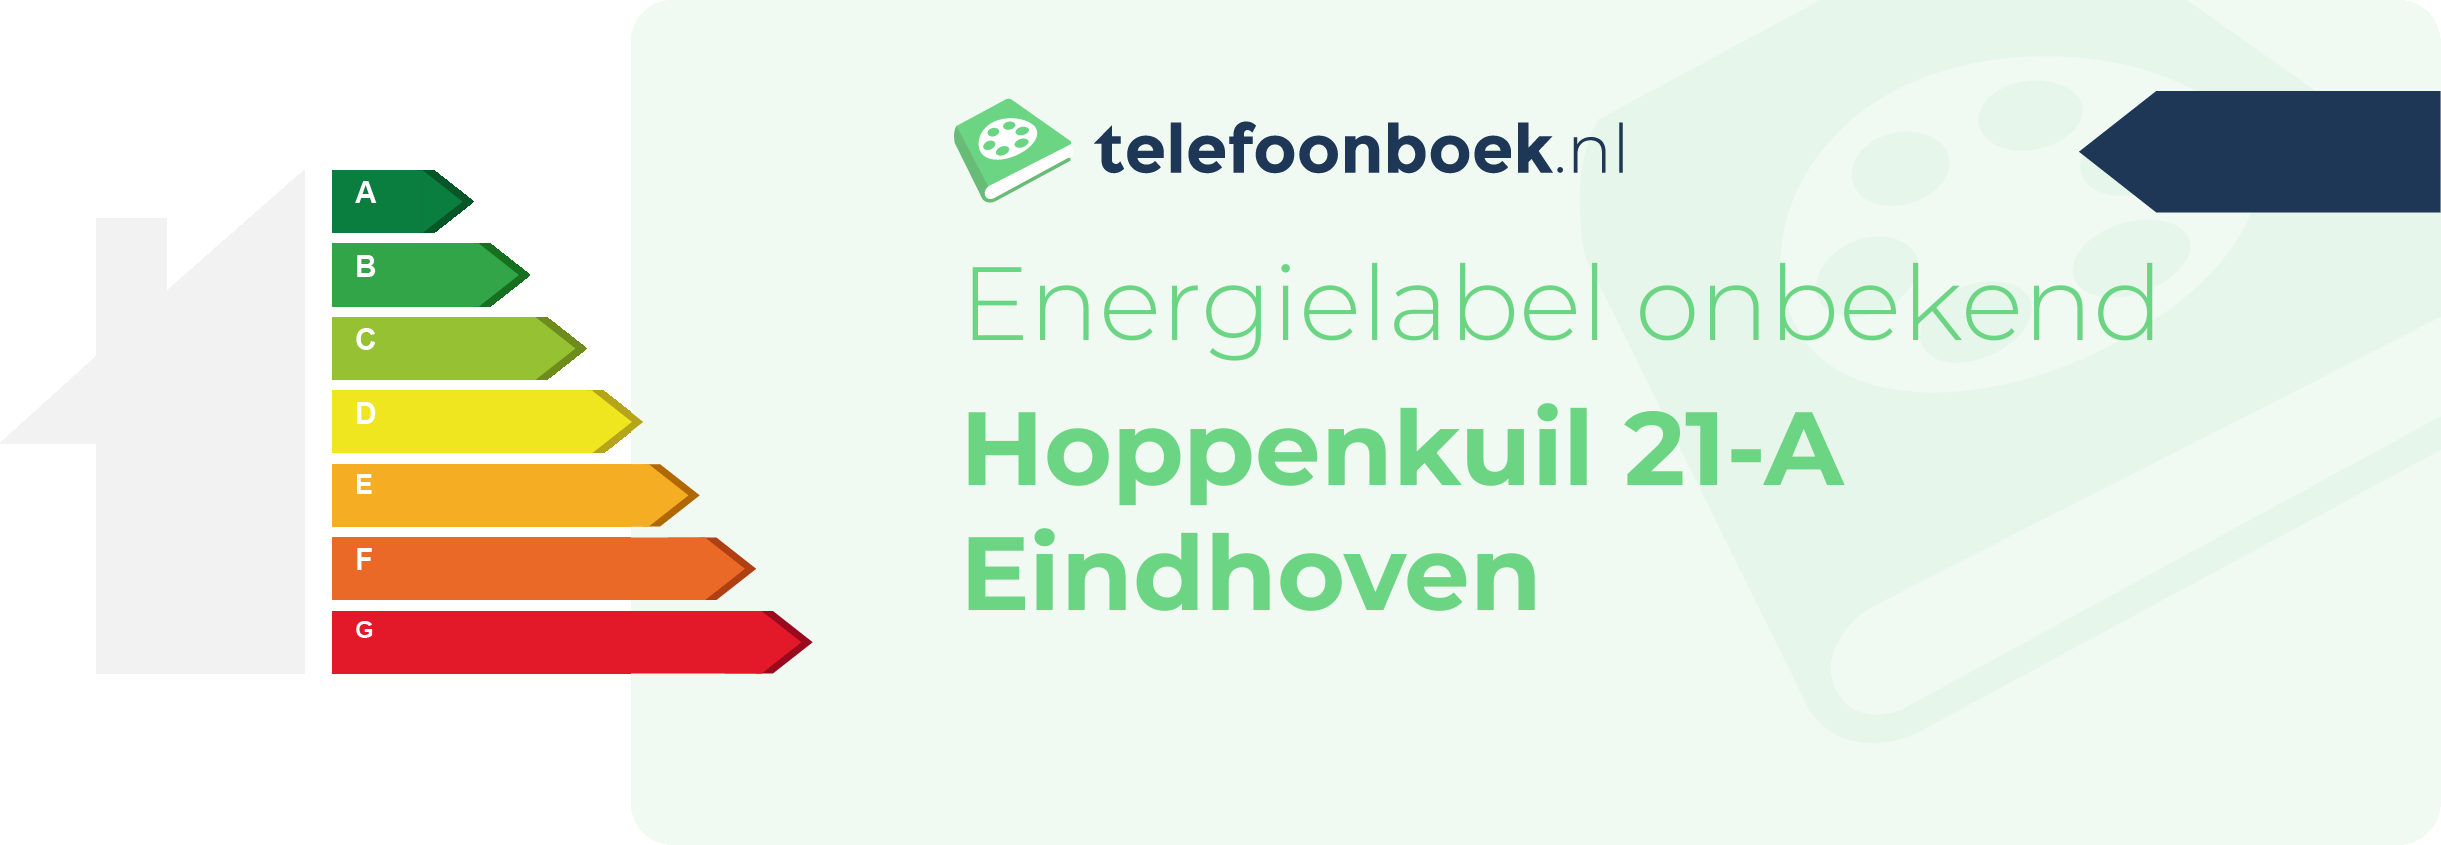 Energielabel Hoppenkuil 21-A Eindhoven